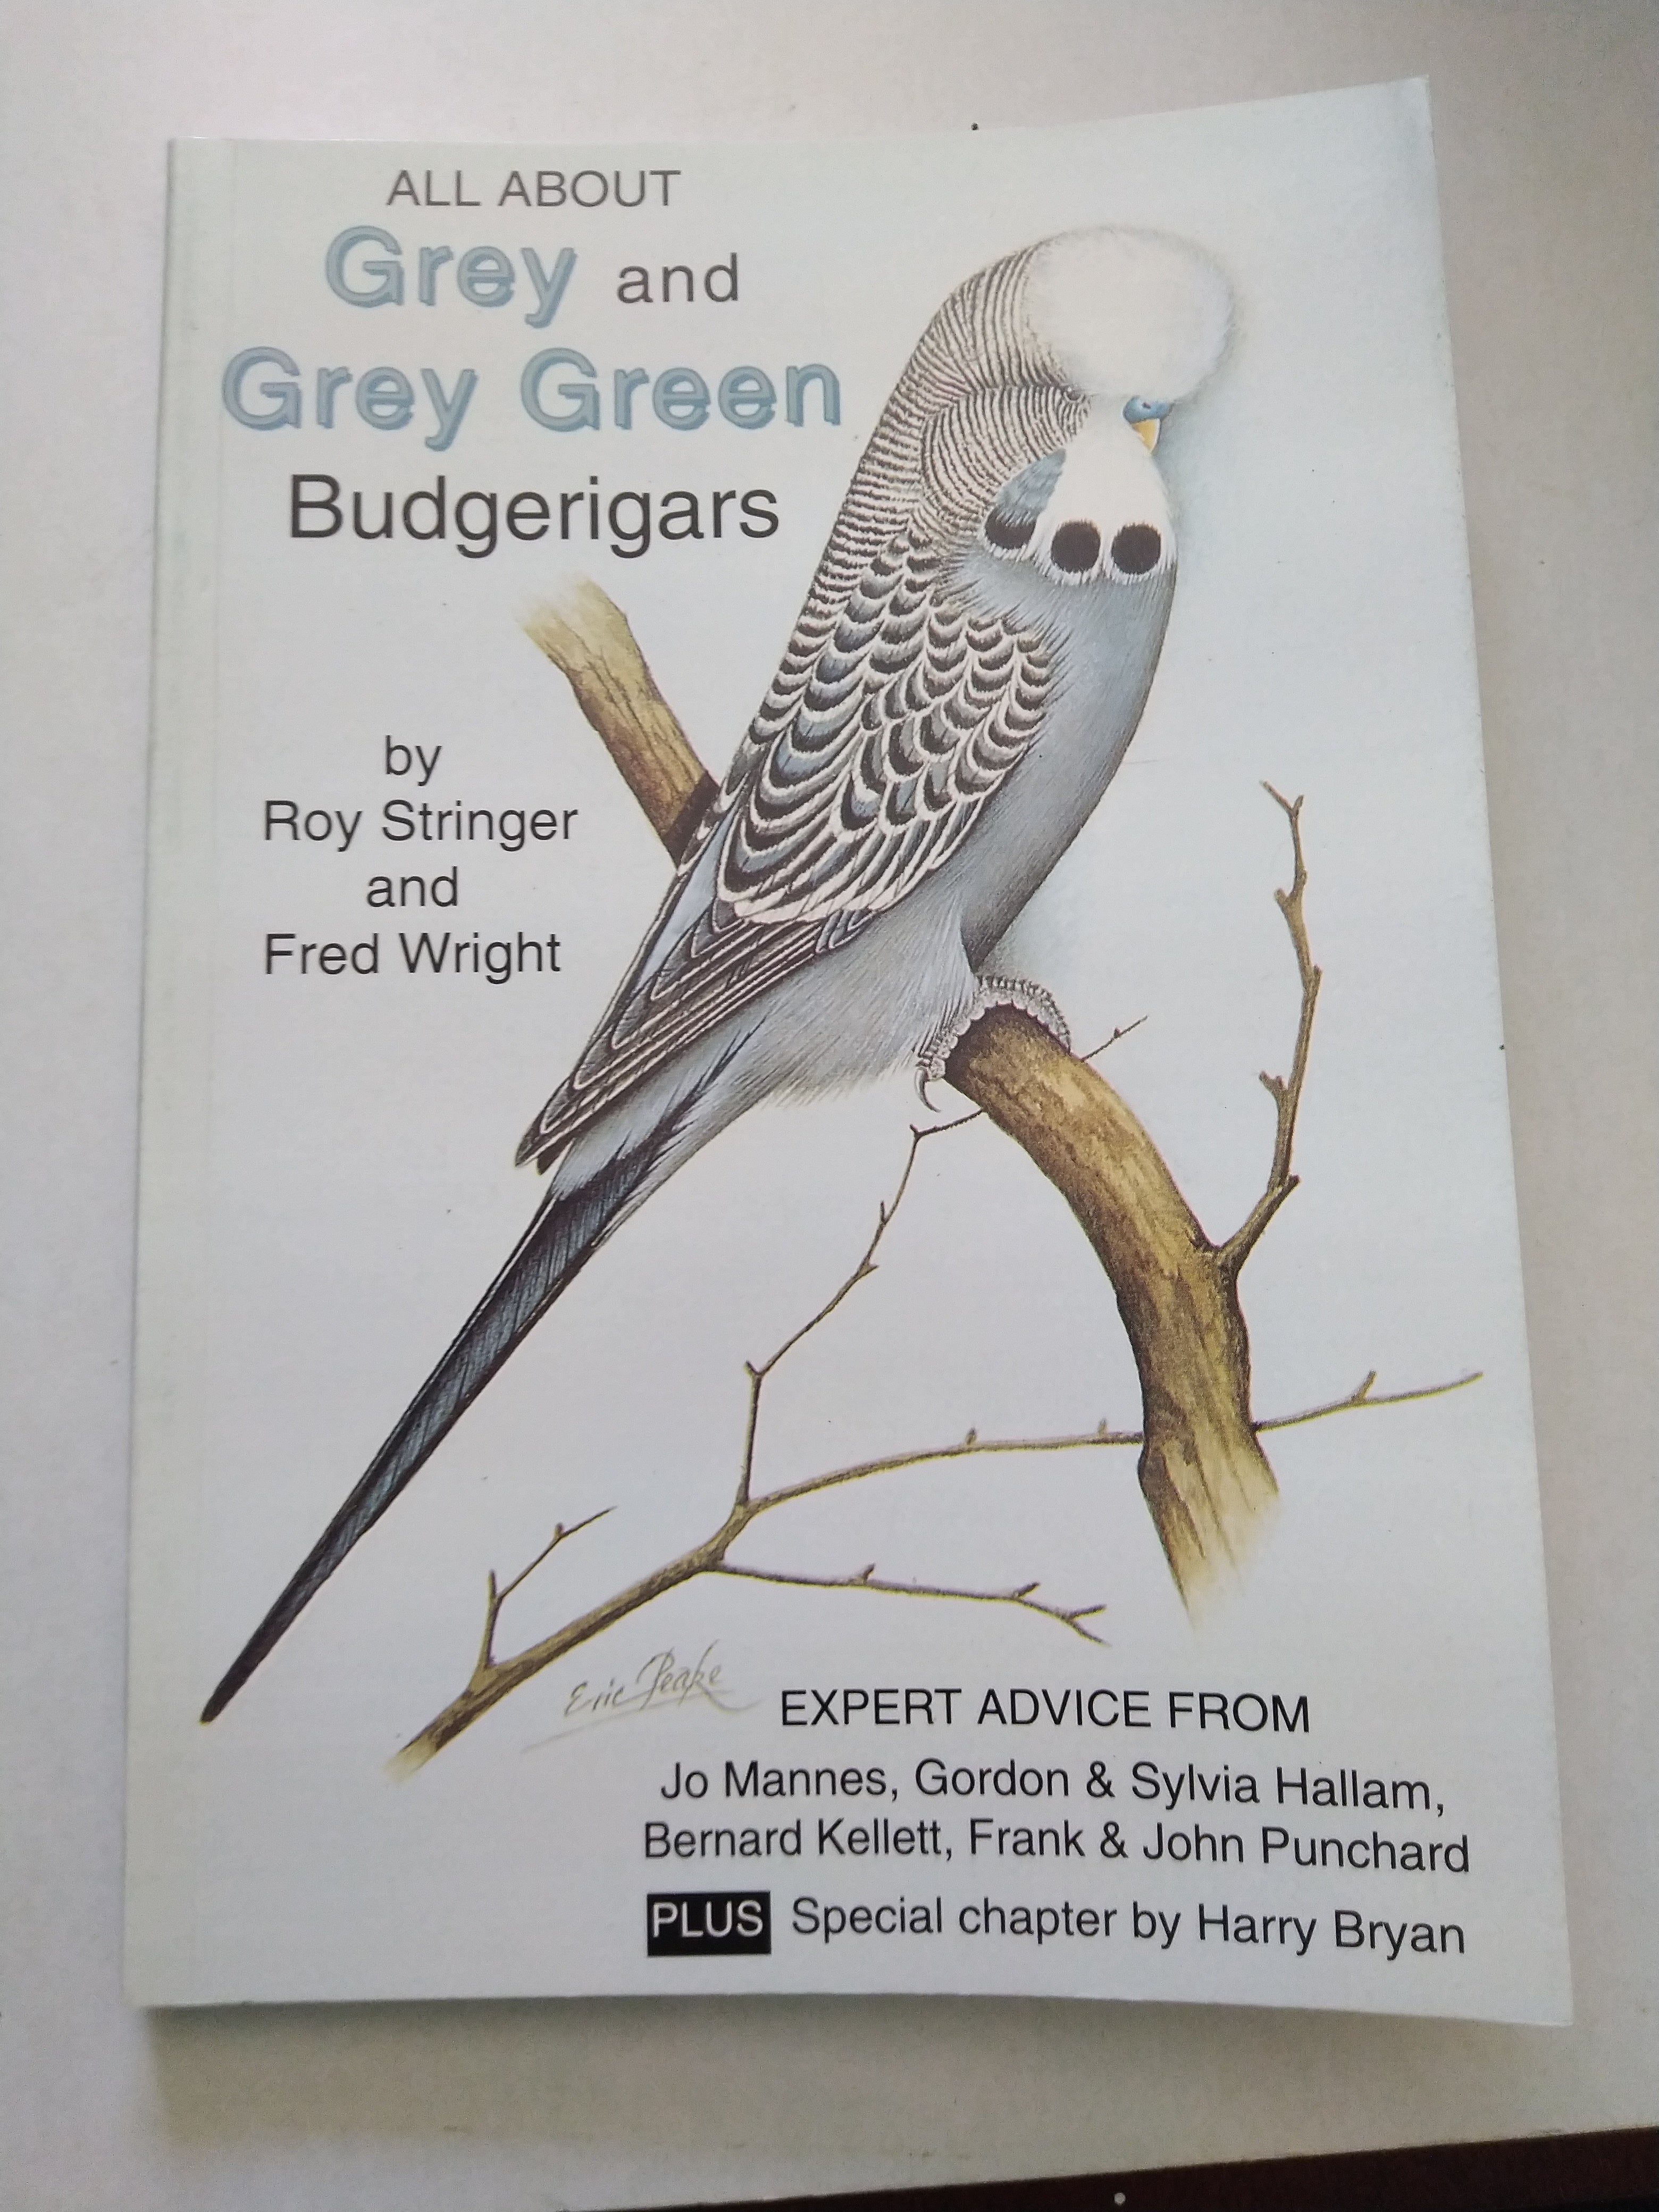 All About Grey & Grey Green Budgerigars by Fred Wright and Roy Stringer (New)